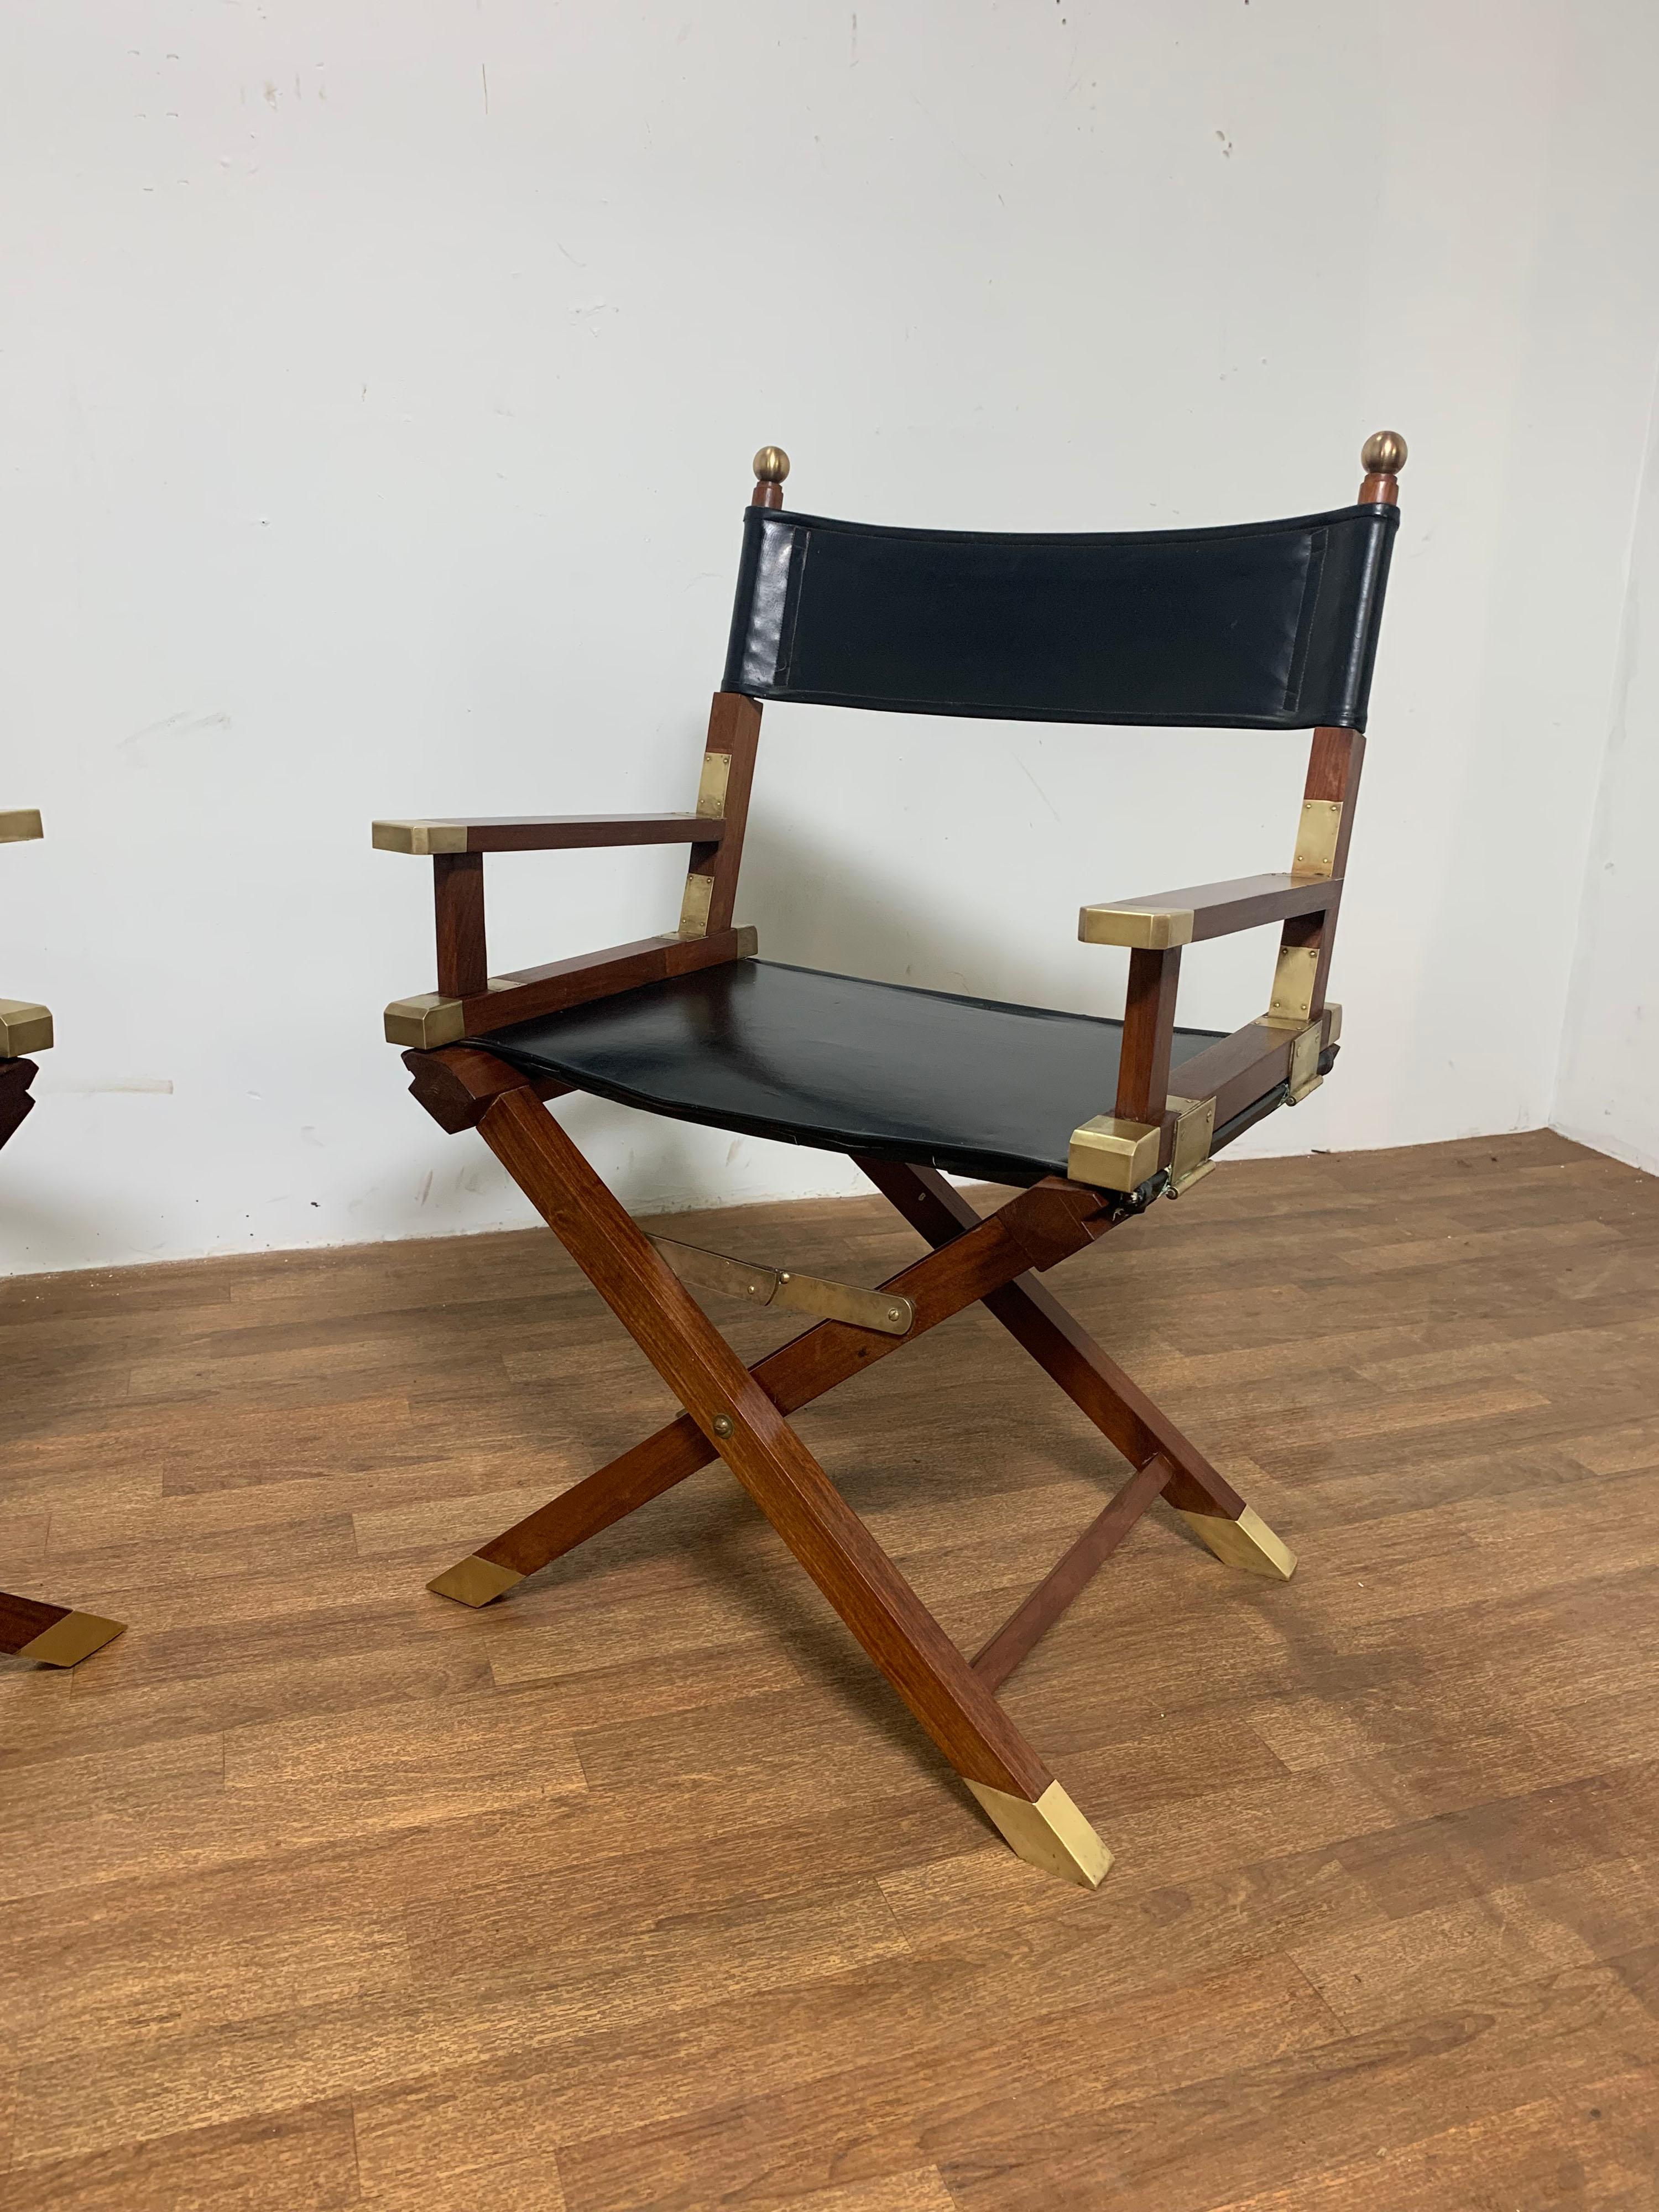 Hong Kong Pair of Bespoke Charlotte Horstmann Rosewood and Brass Campaign Chairs, C. 1950s For Sale